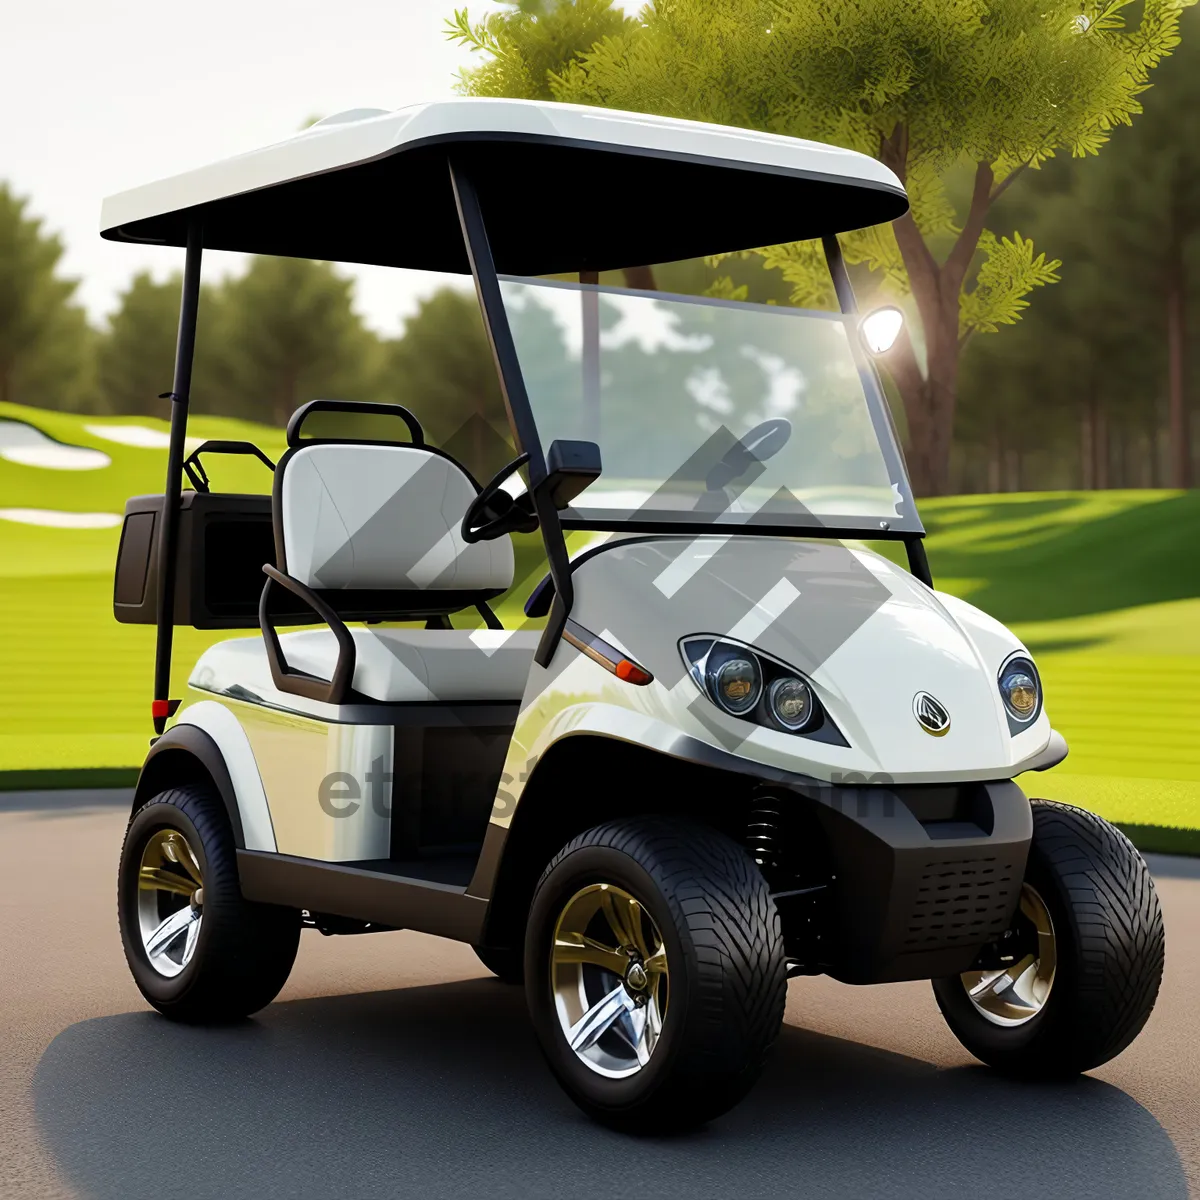 Picture of Sporty Golf Cart on Course